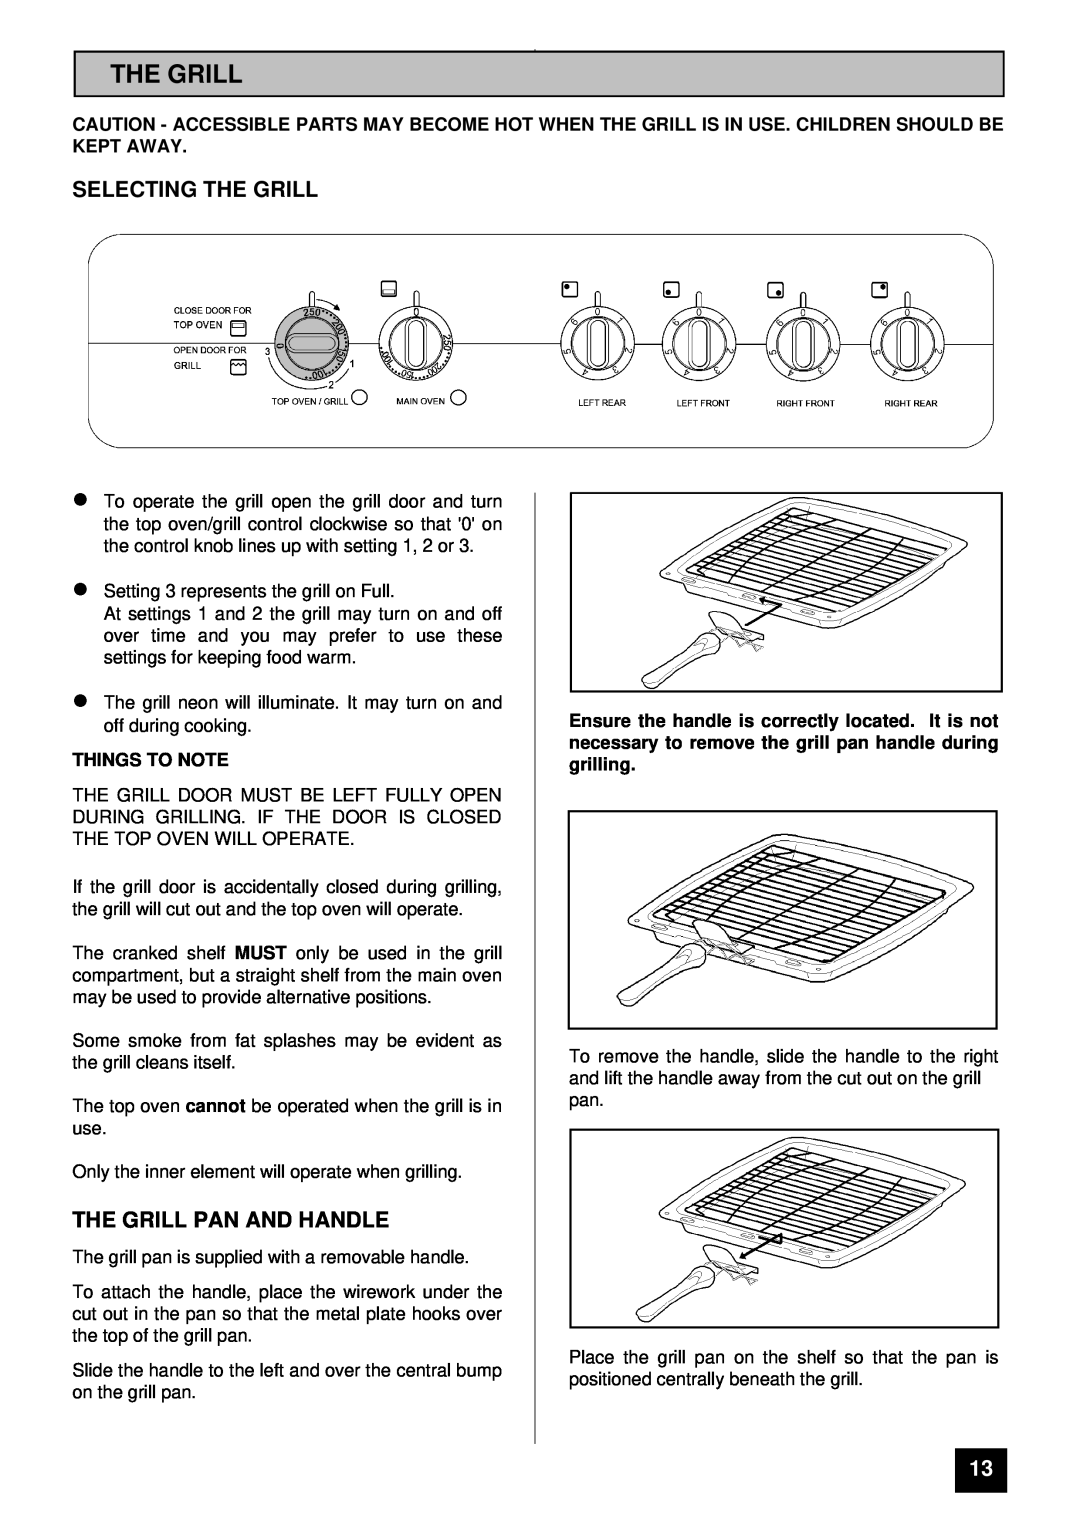 Tricity Bendix SI 055 installation instructions Selecting The Grill, The Grill Pan And Handle, Things To Note 